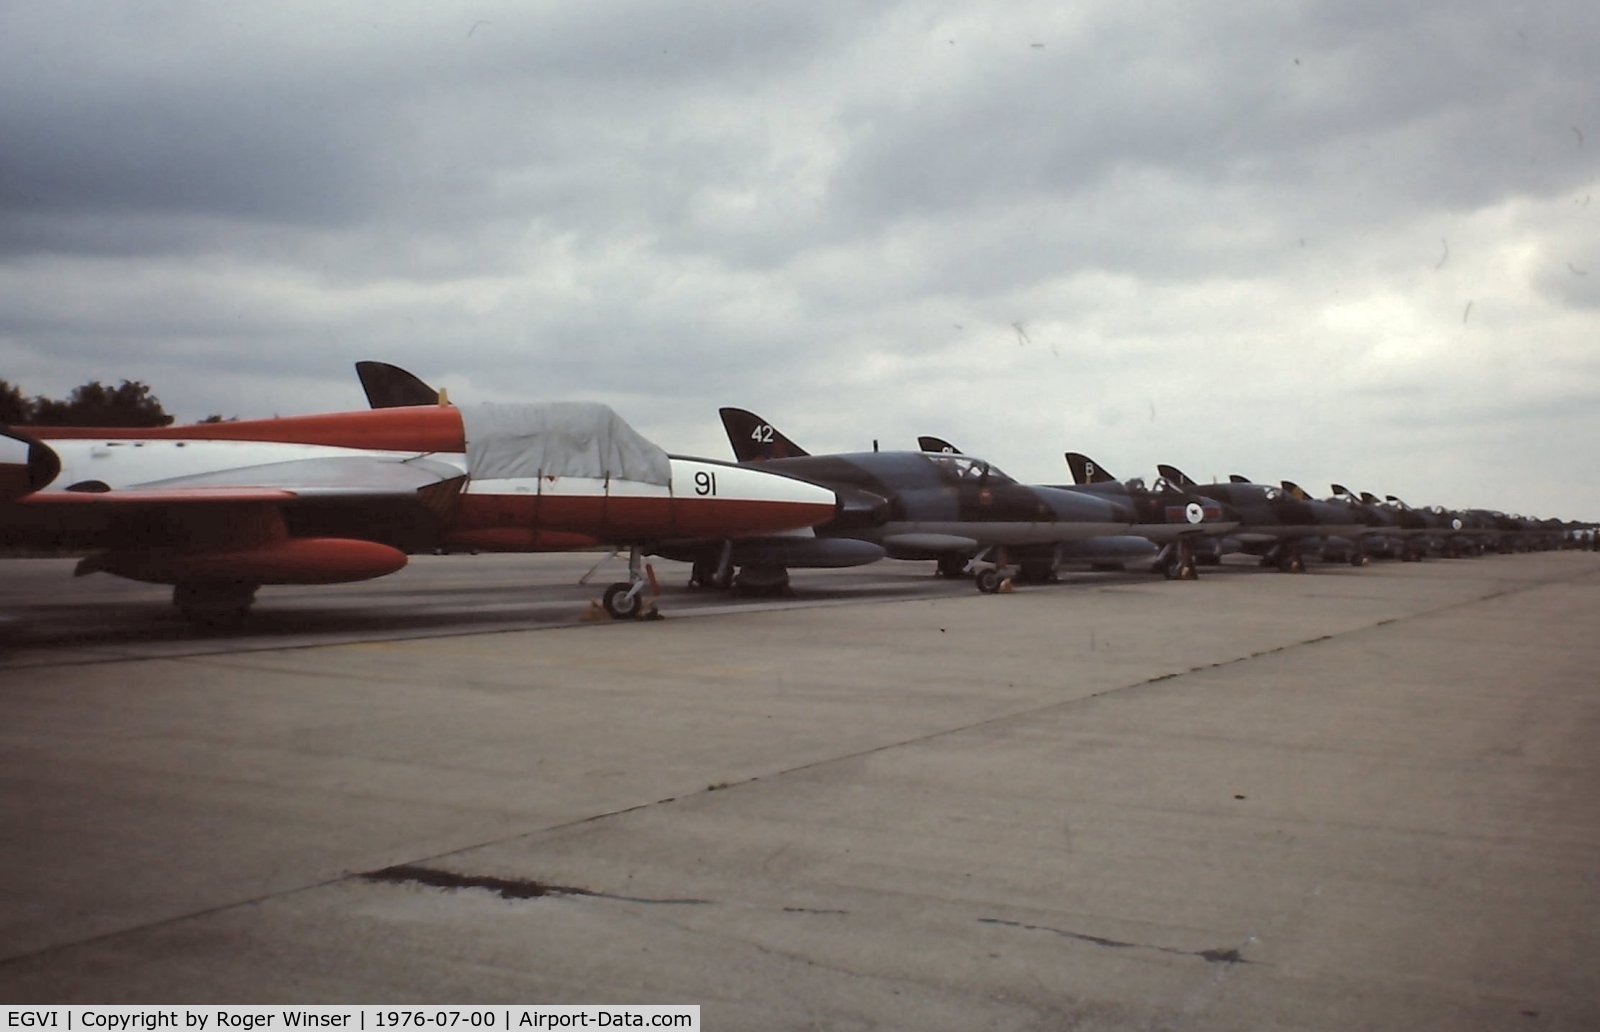 EGVI Airport - Line up of 2 seat Hawker Hunters at IAT 76 held at RAF Greenham Common in July 1976. Celebrating the 25 years since the first flight of the Hunter on 20 July 1951. 